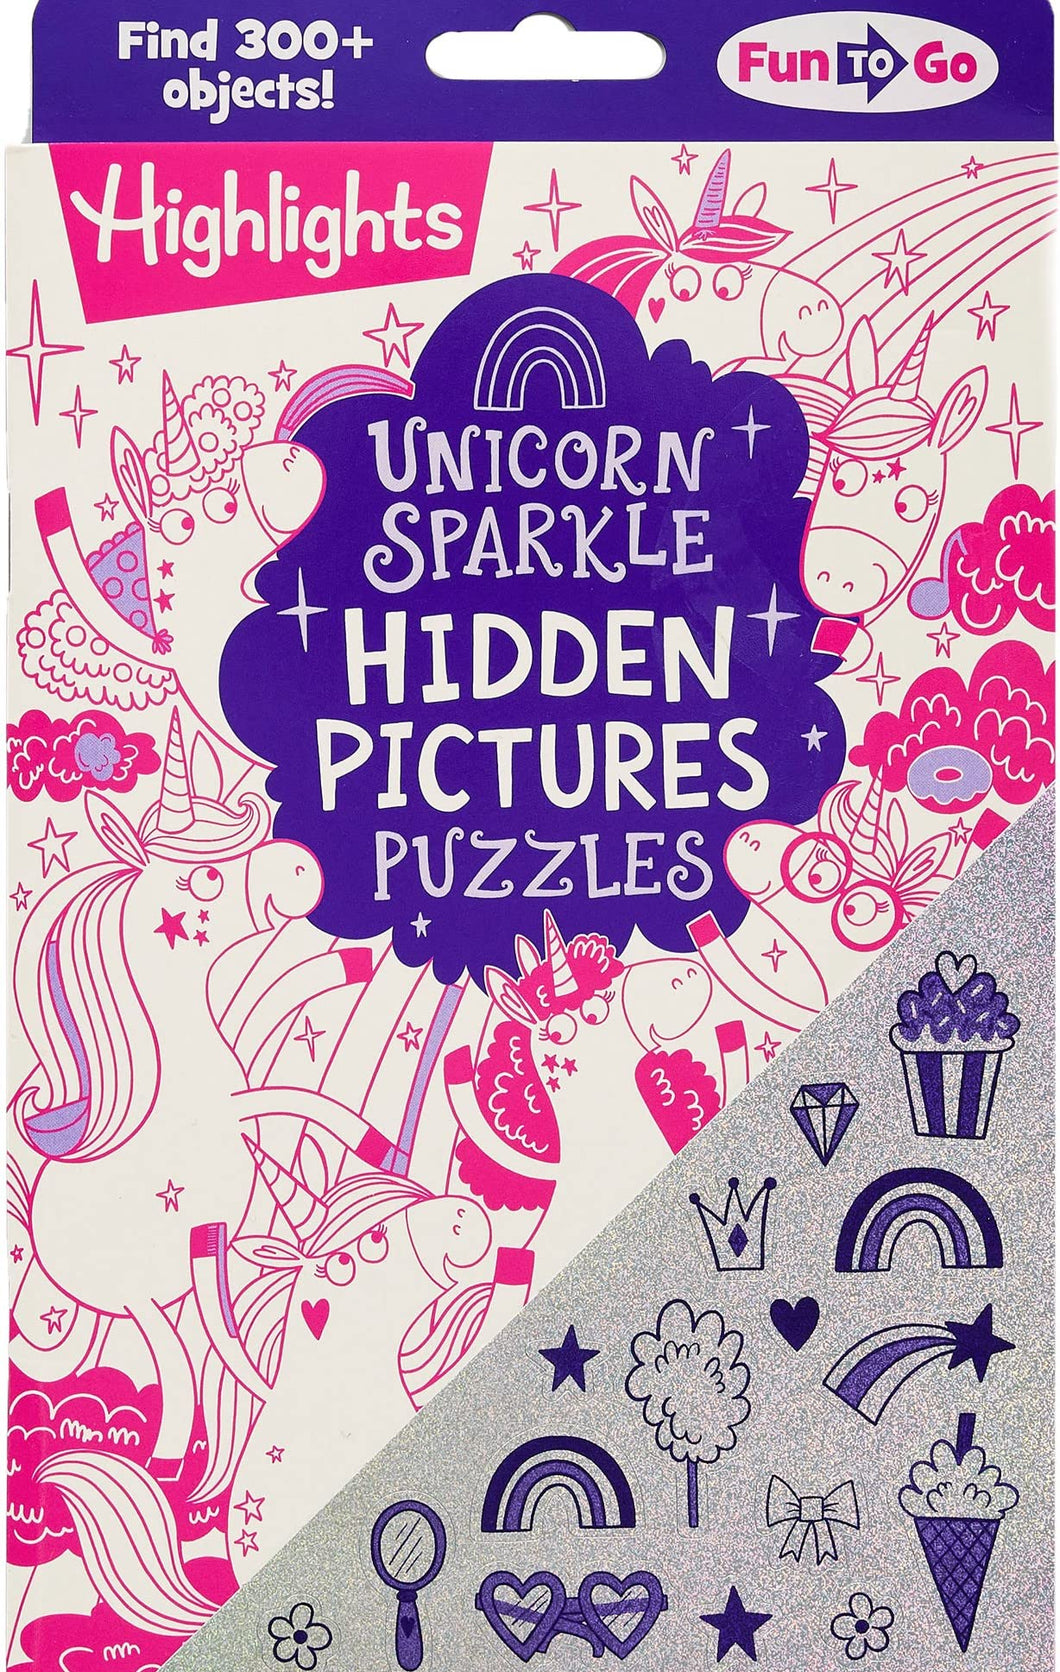 Unicorn Sparkle Hidden Pictures- Puzzles To Highlight